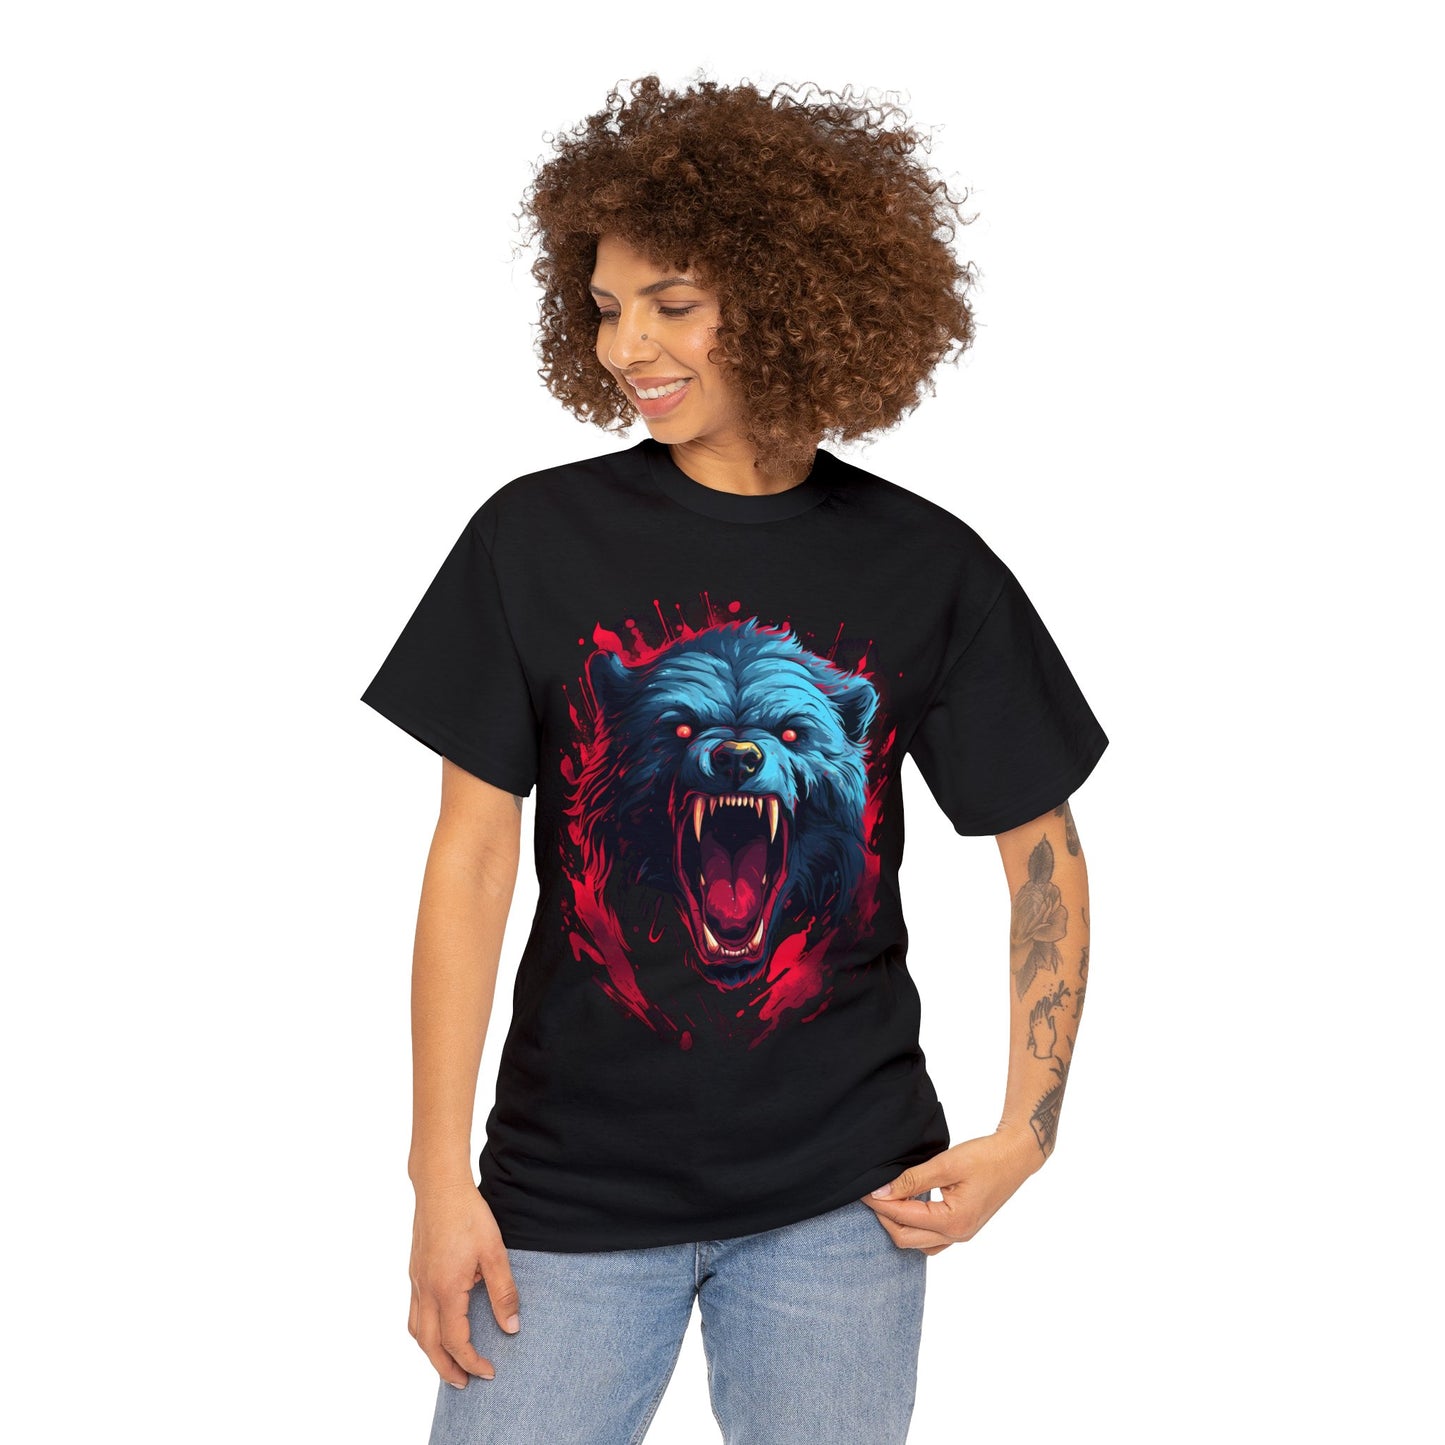 Bear Angry Blue Pink Contrast Graphic Design Tee